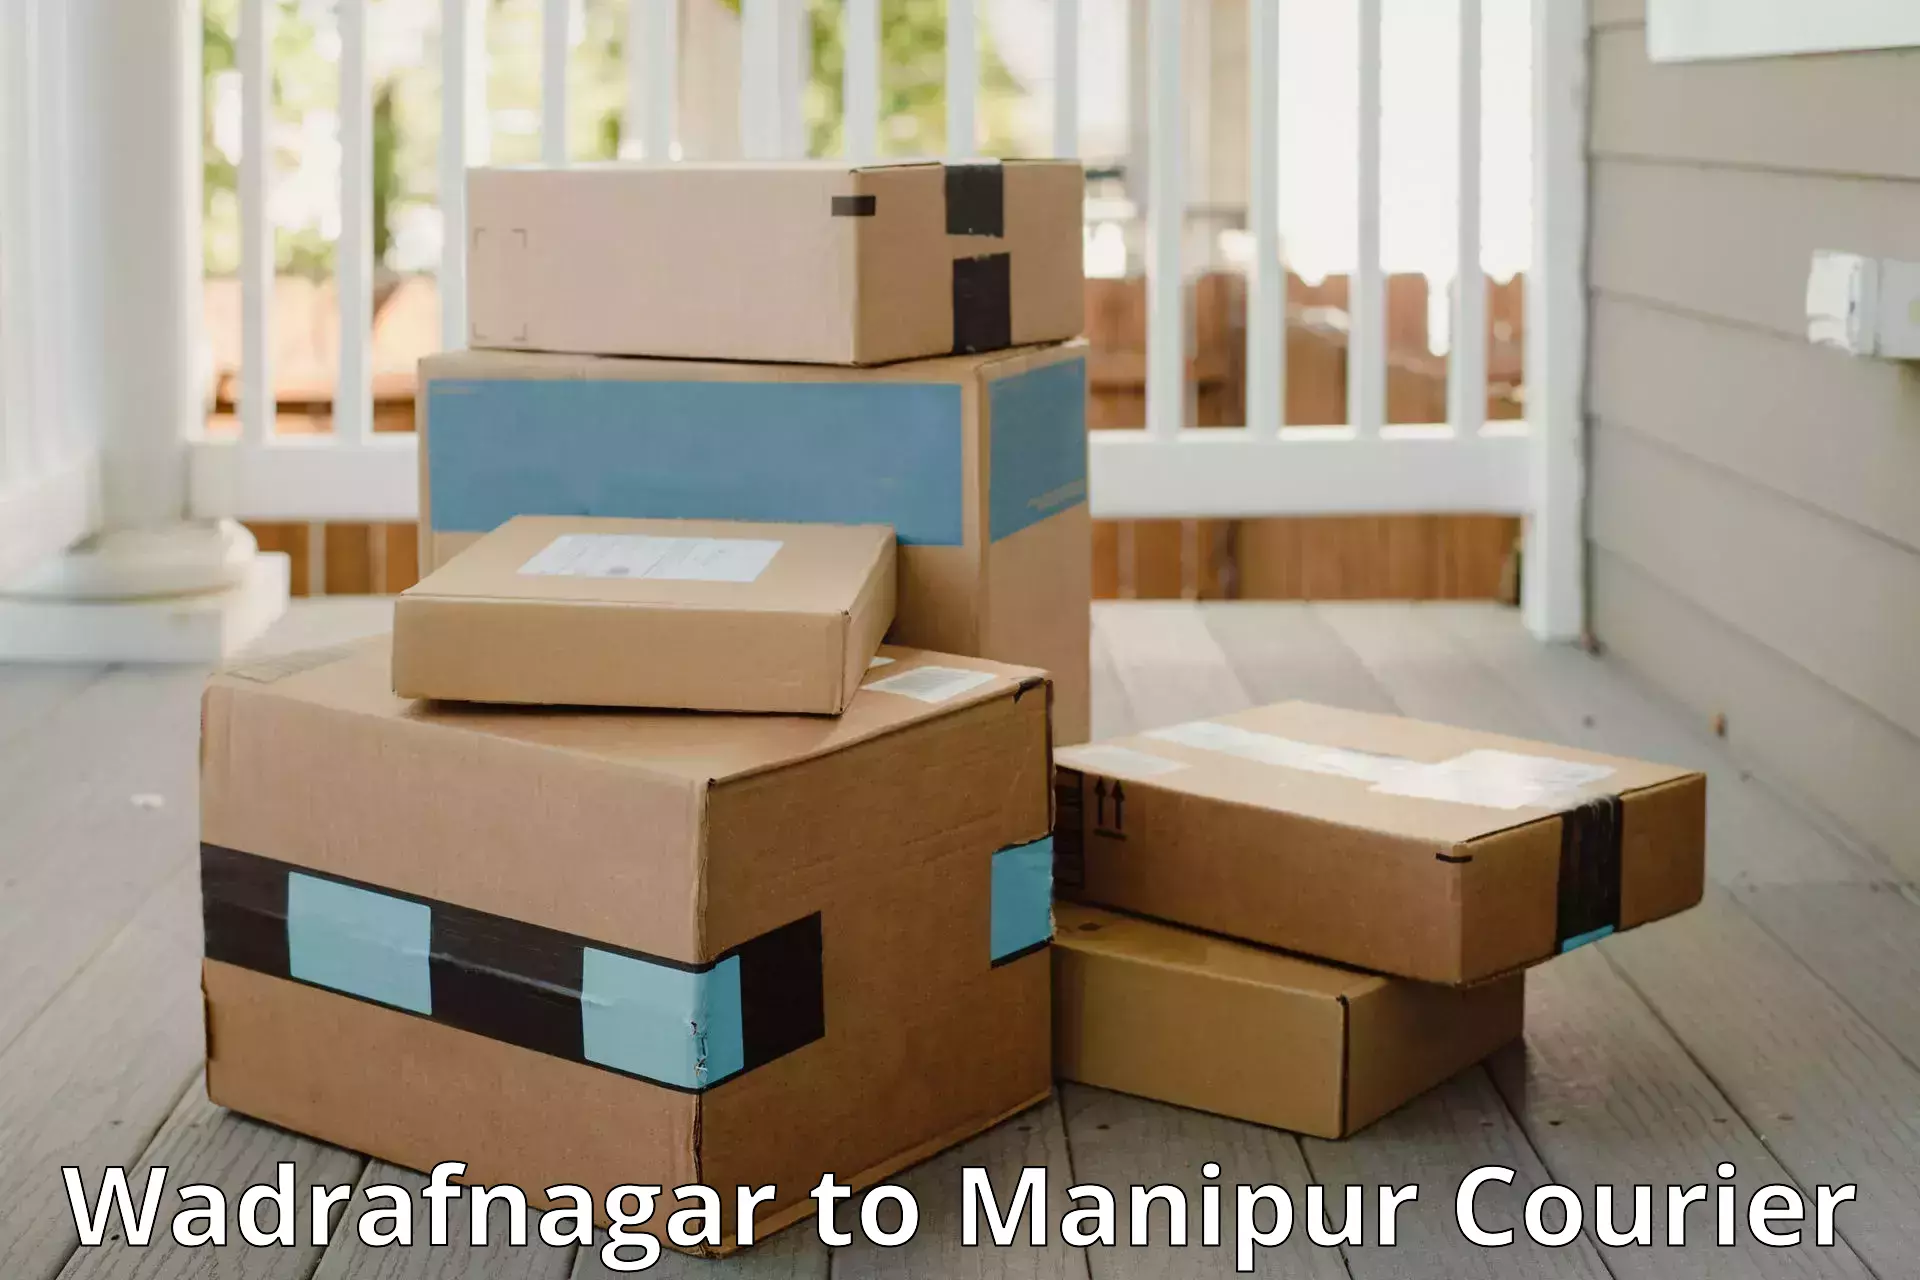 Personal luggage delivery in Wadrafnagar to Kanti